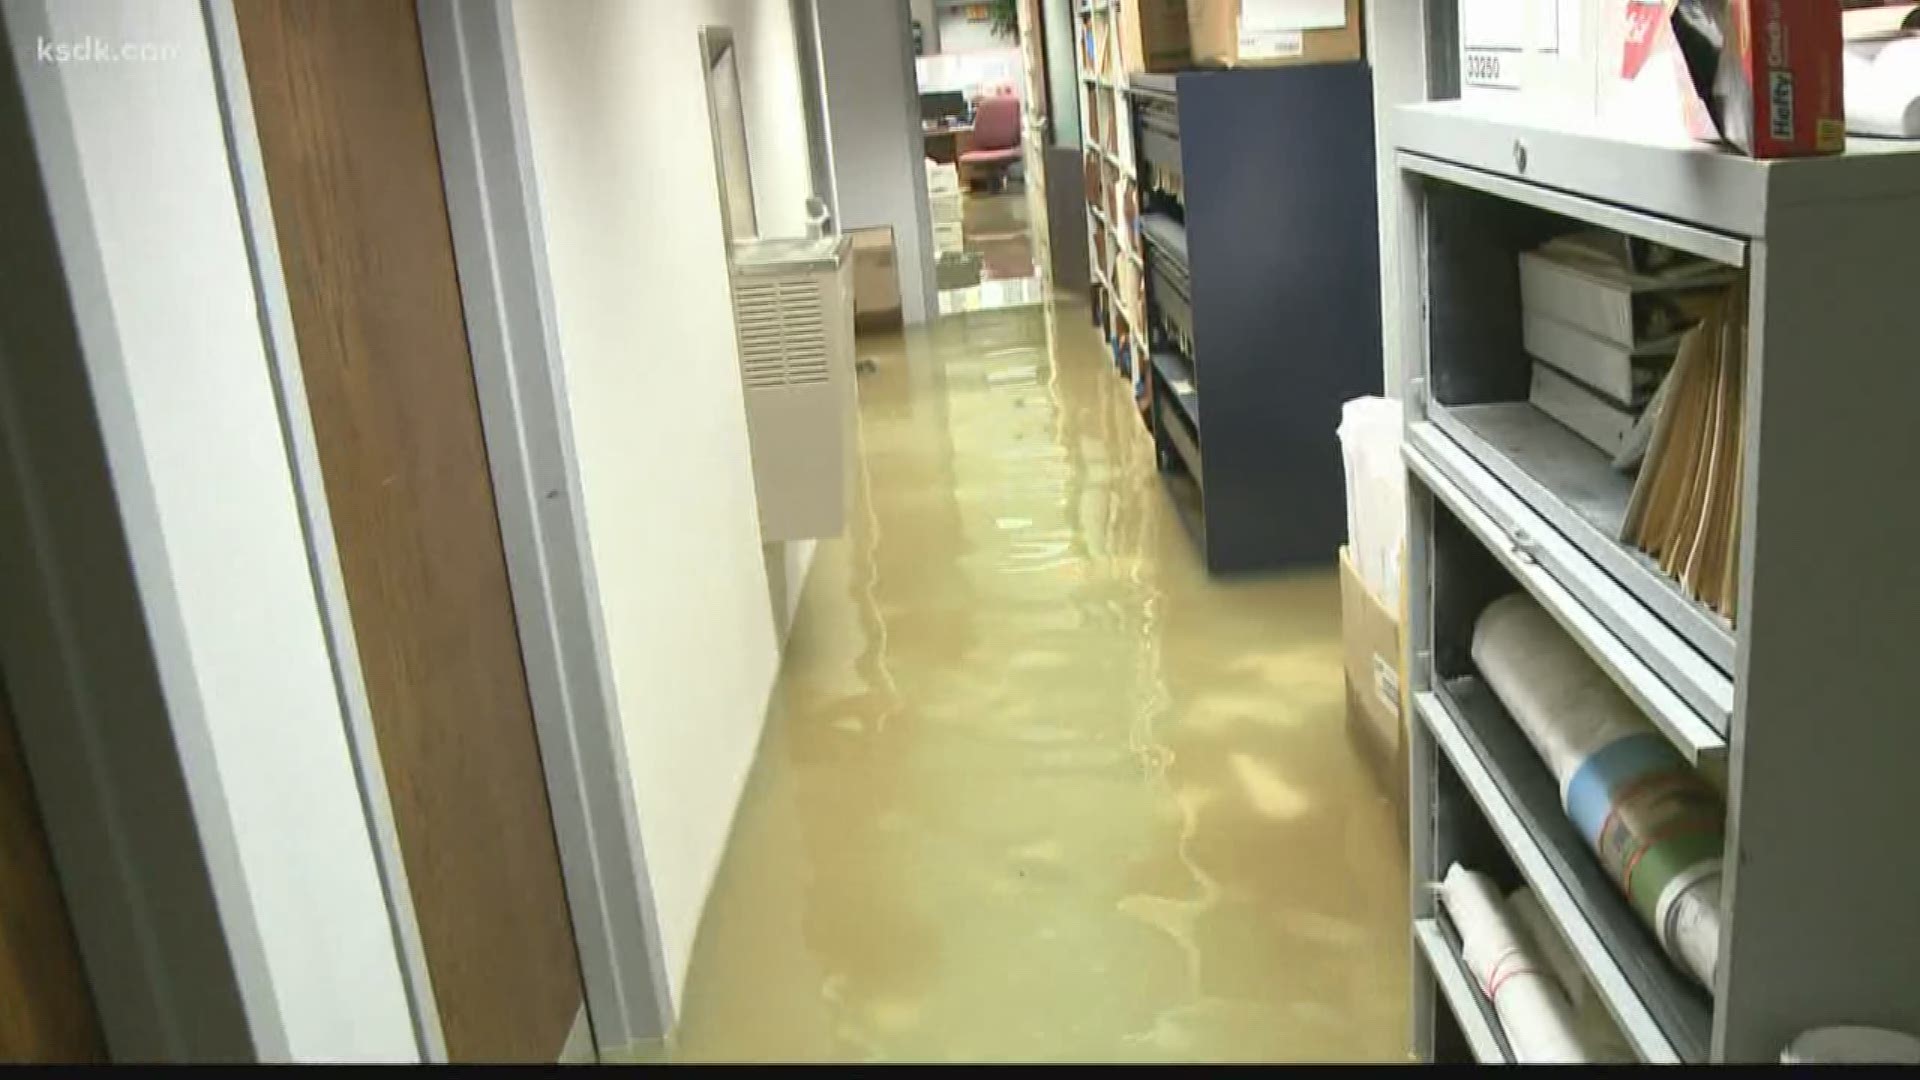 The water main break is next to the Crestwood Fire Department, flooding the basement of the Crestwood Government Center.